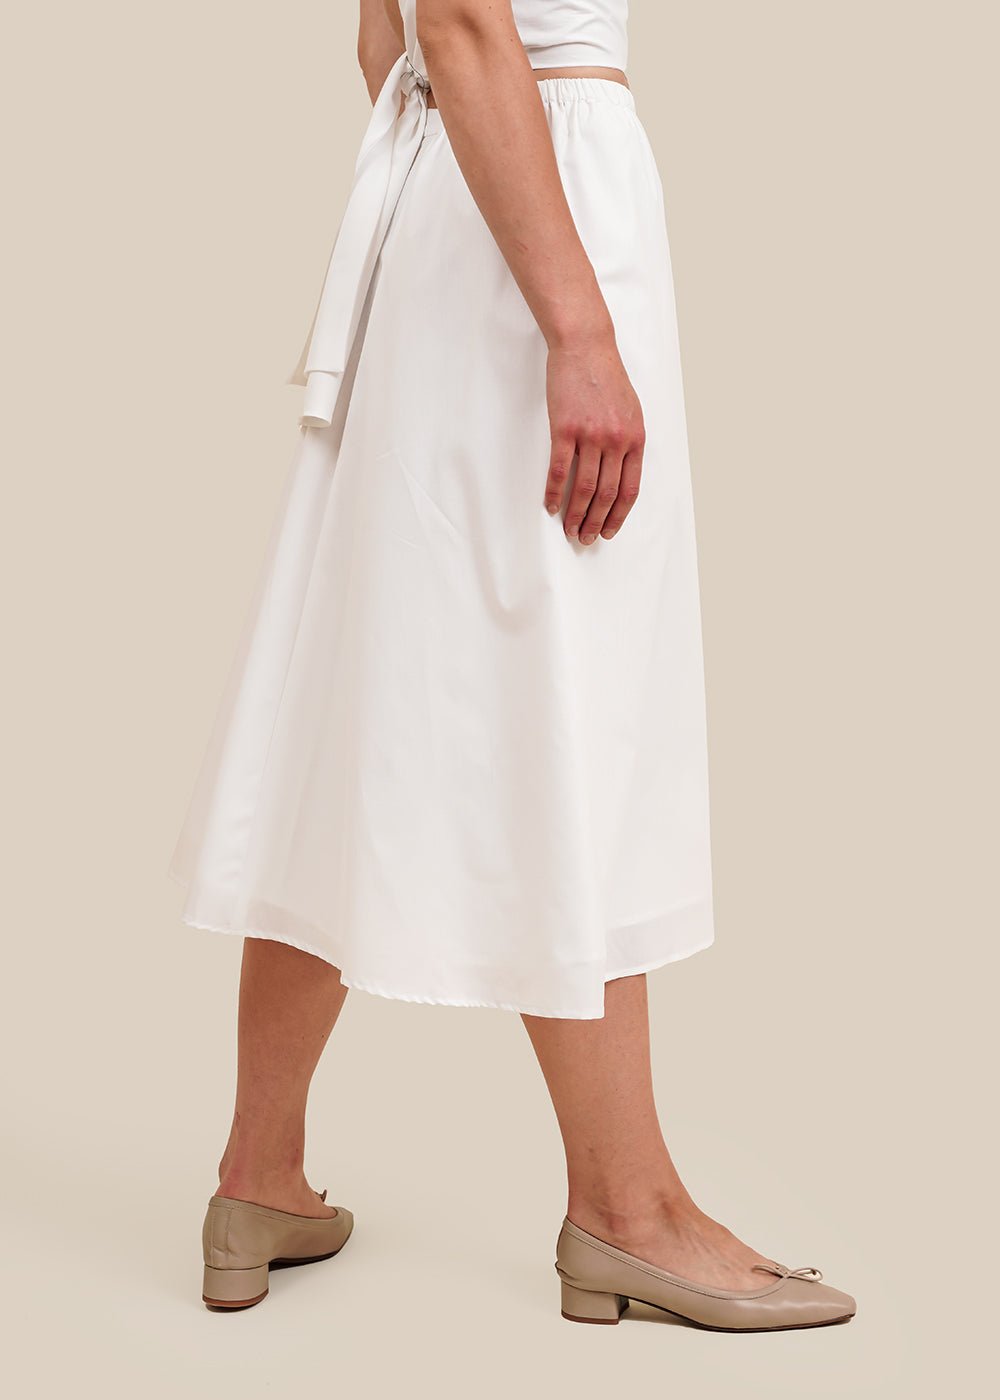 Angie Bauer White Corsica Skirt - New Classics Studios Sustainable Ethical Fashion Canada